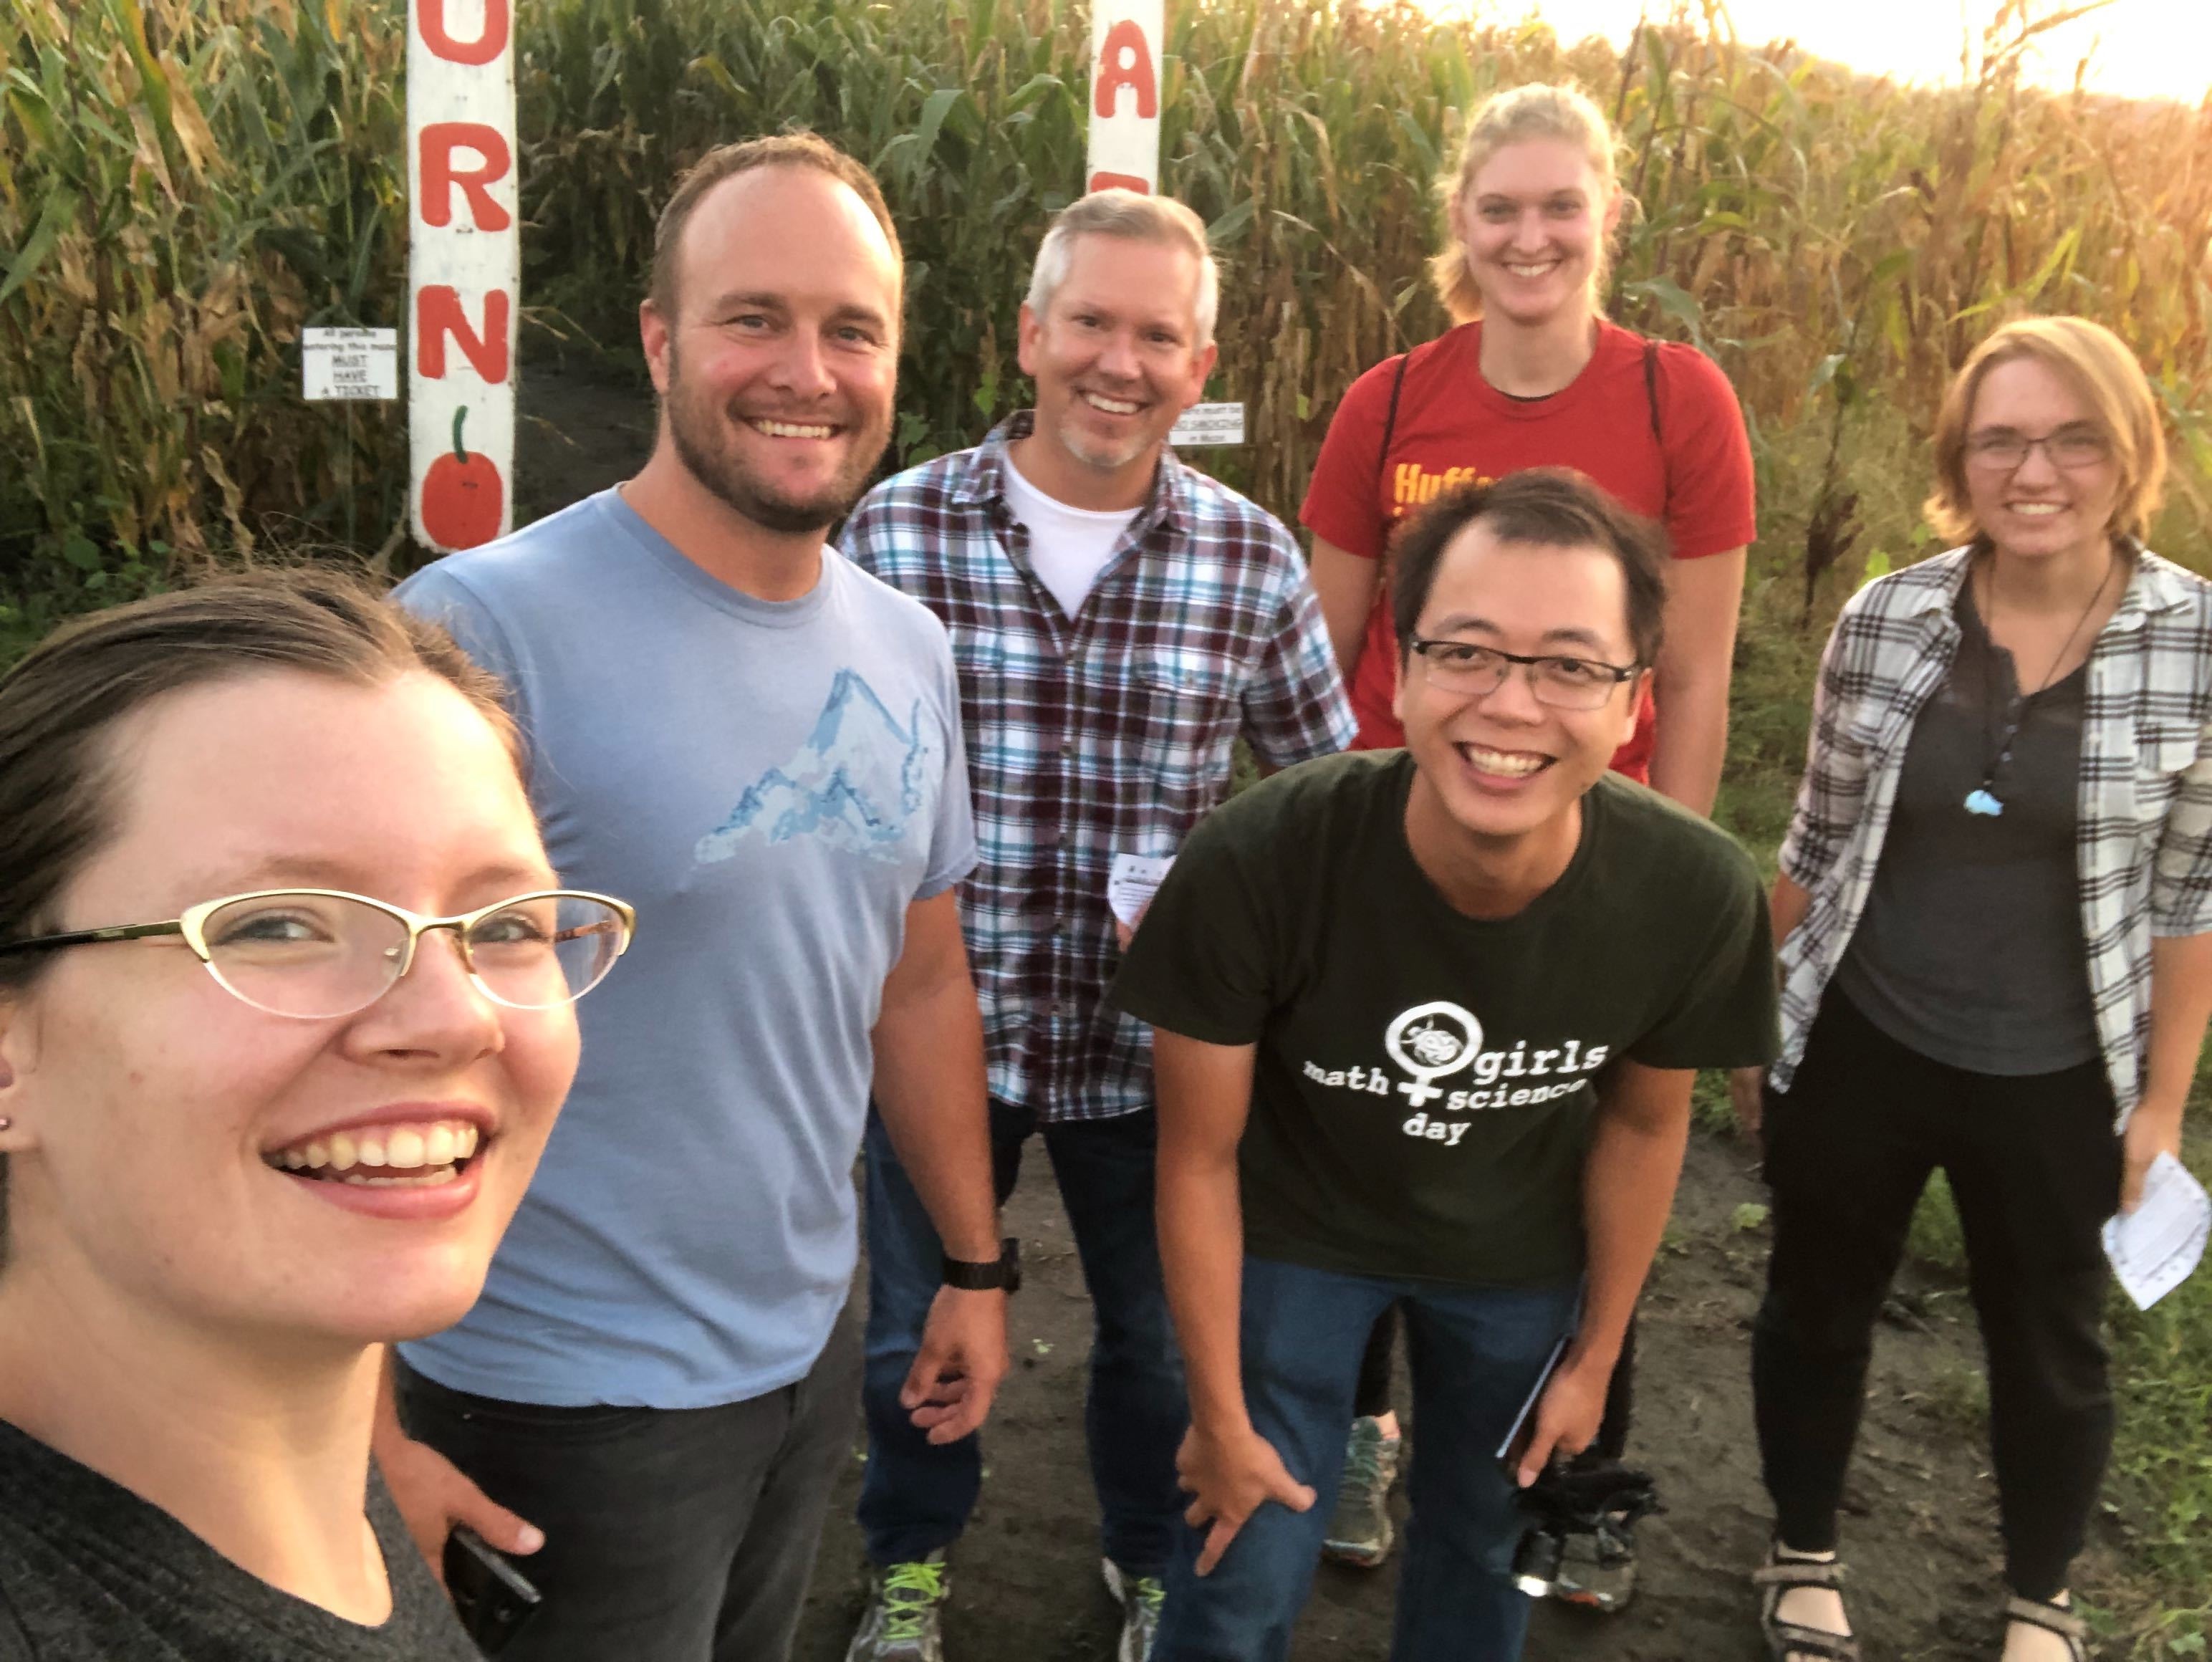 Hufford Lab taking on the Pumpkinville Corn Maze